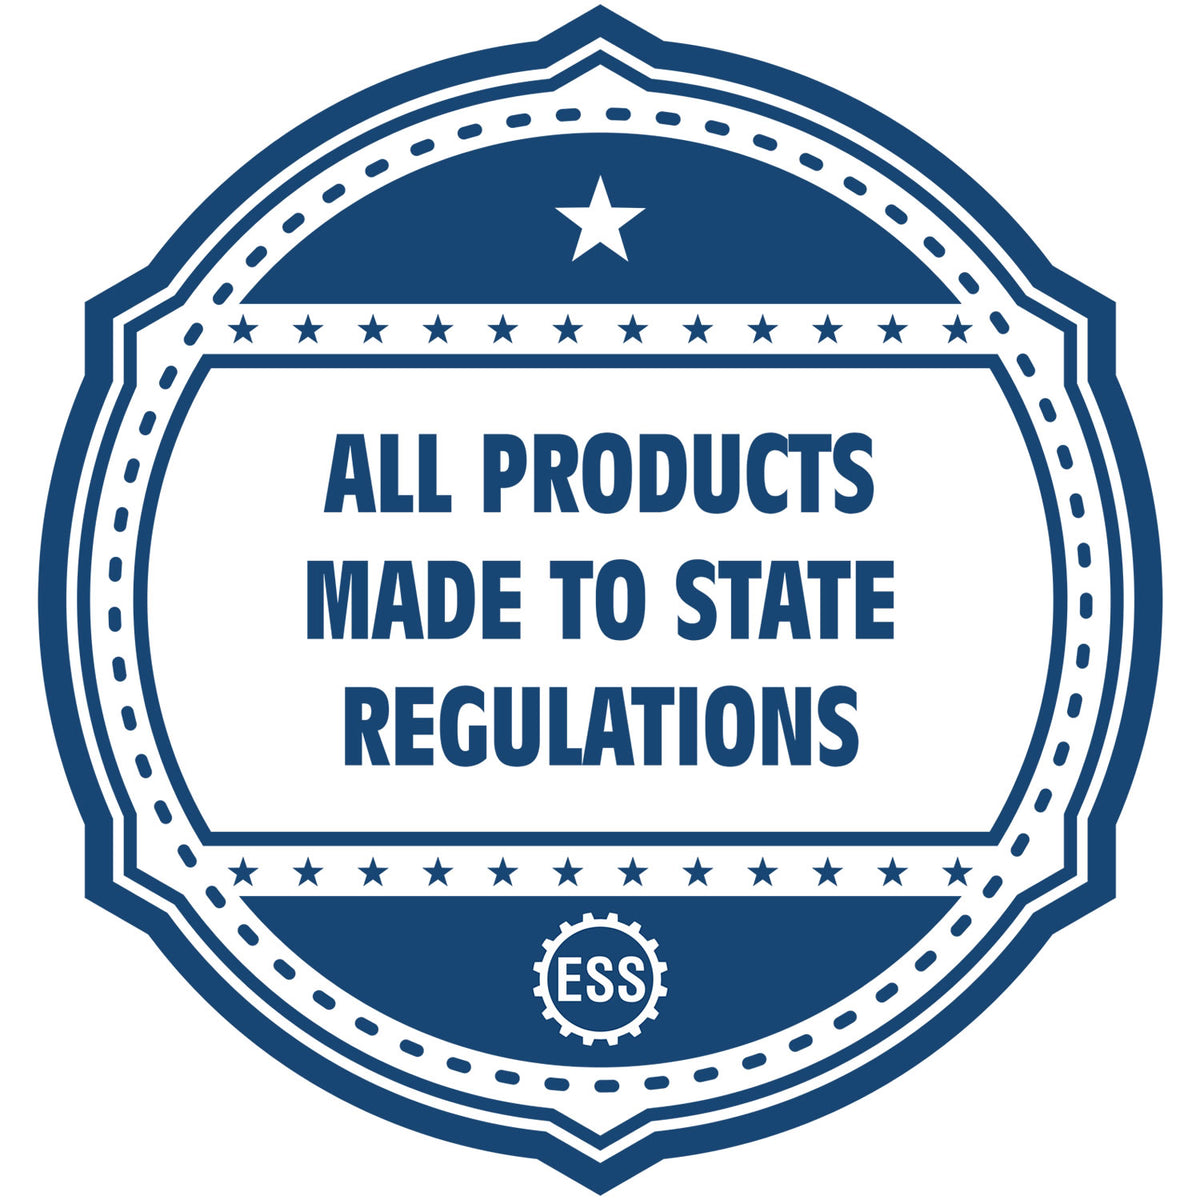 An icon or badge element for the PSI Florida Notary Stamp showing that this product is made in compliance with state regulations.